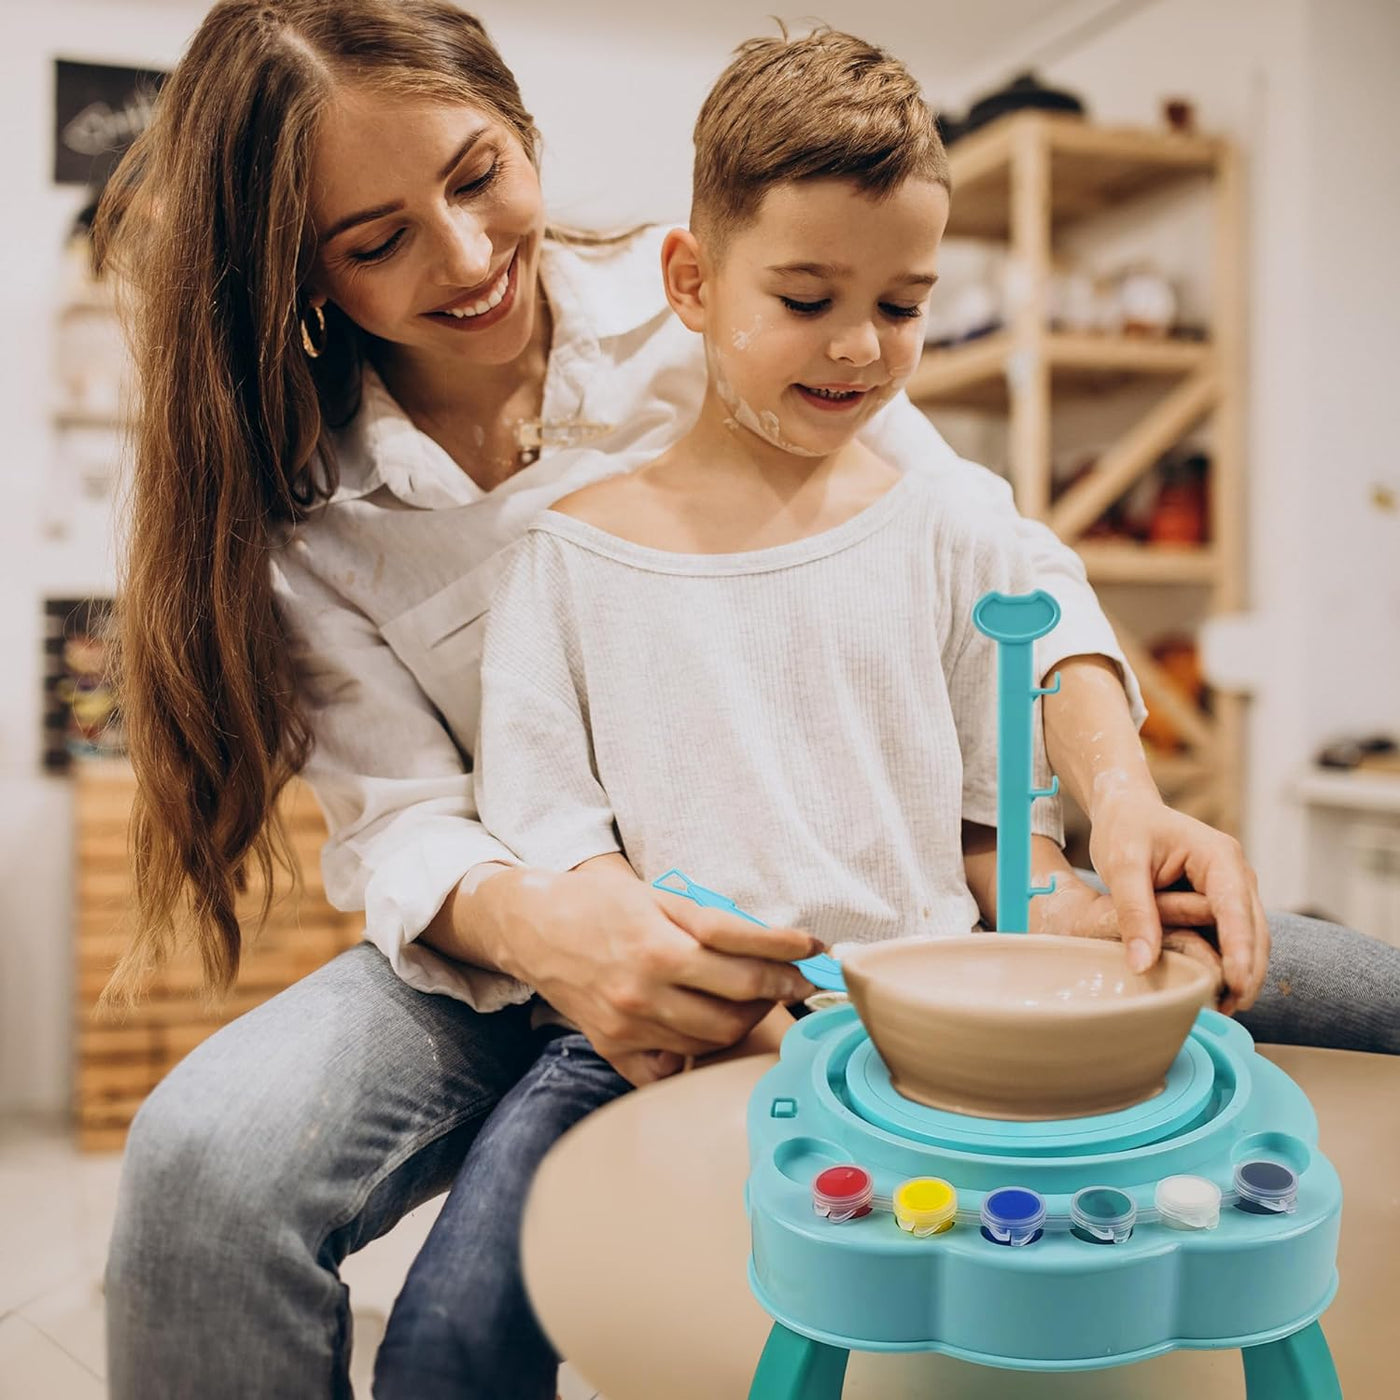 Pottery Kit for Kids - Complete Kids Pottery Wheel Kit with Electric Wheel, Paint, Modeling Clay, & Tools